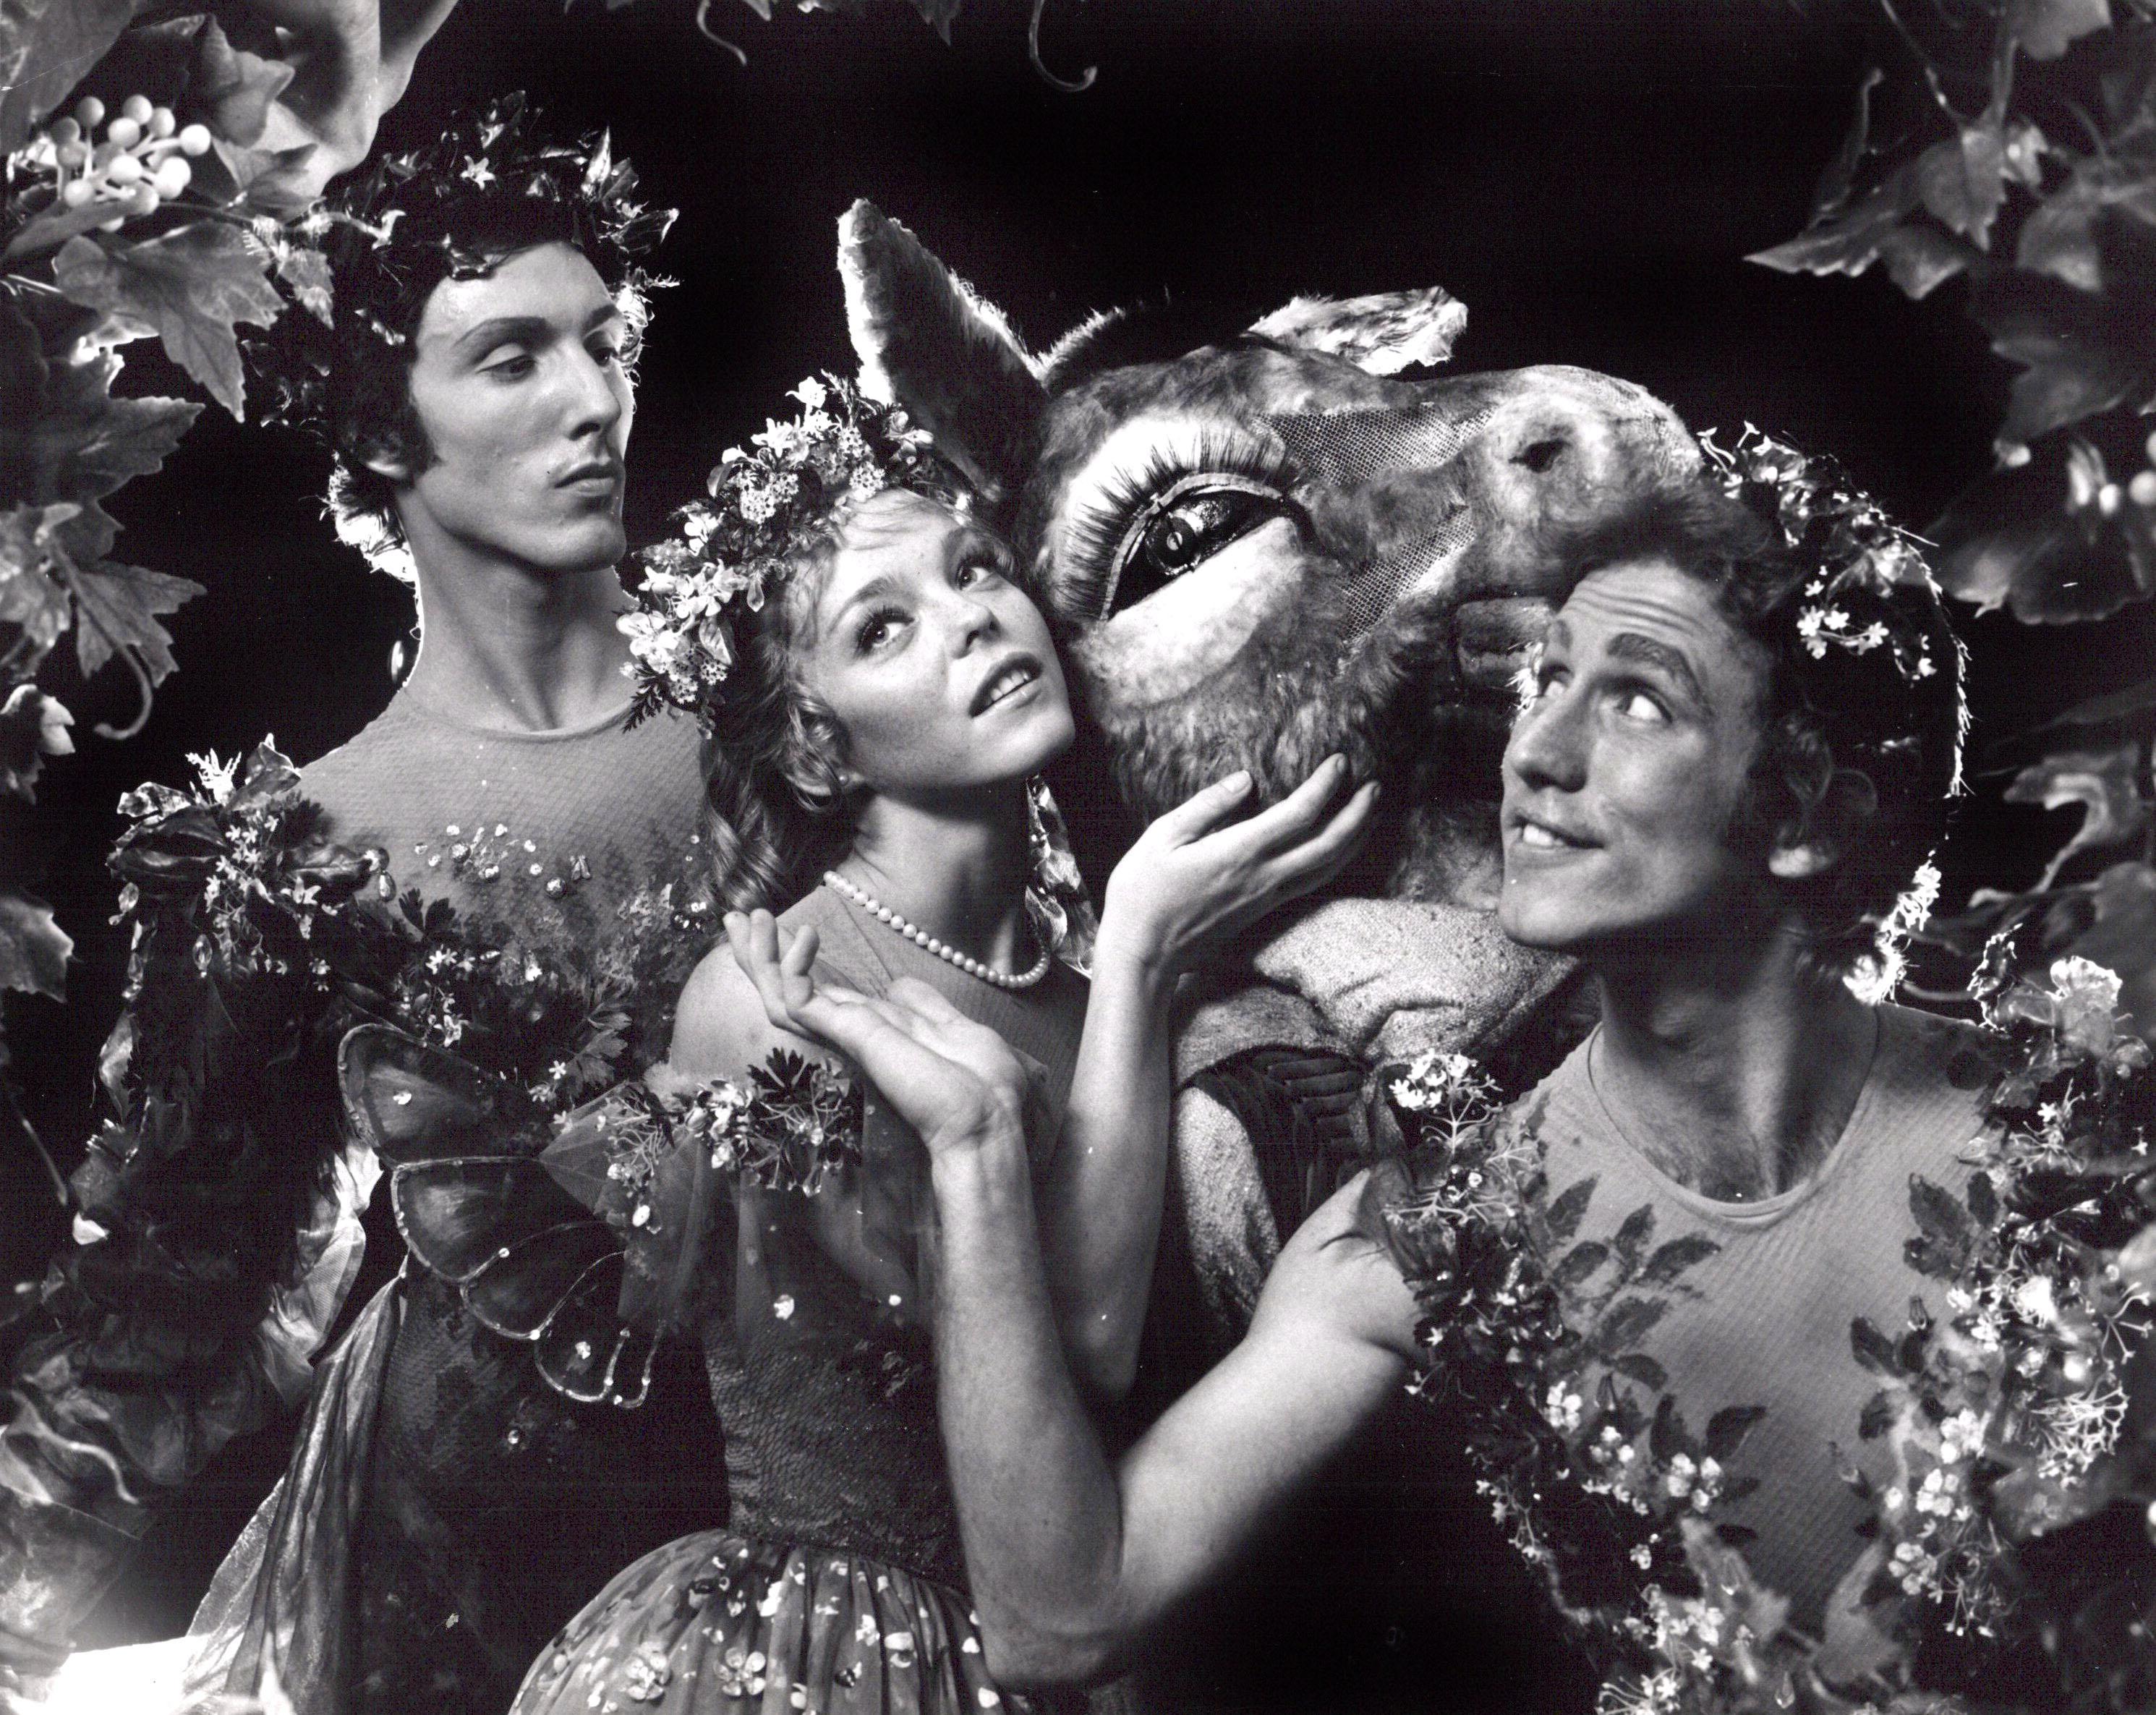 Jack Mitchell Black and White Photograph - Rebecca Wright,  Burton Taylor & Russell Sultzbach in Joffrey Ballet's 'Dream'